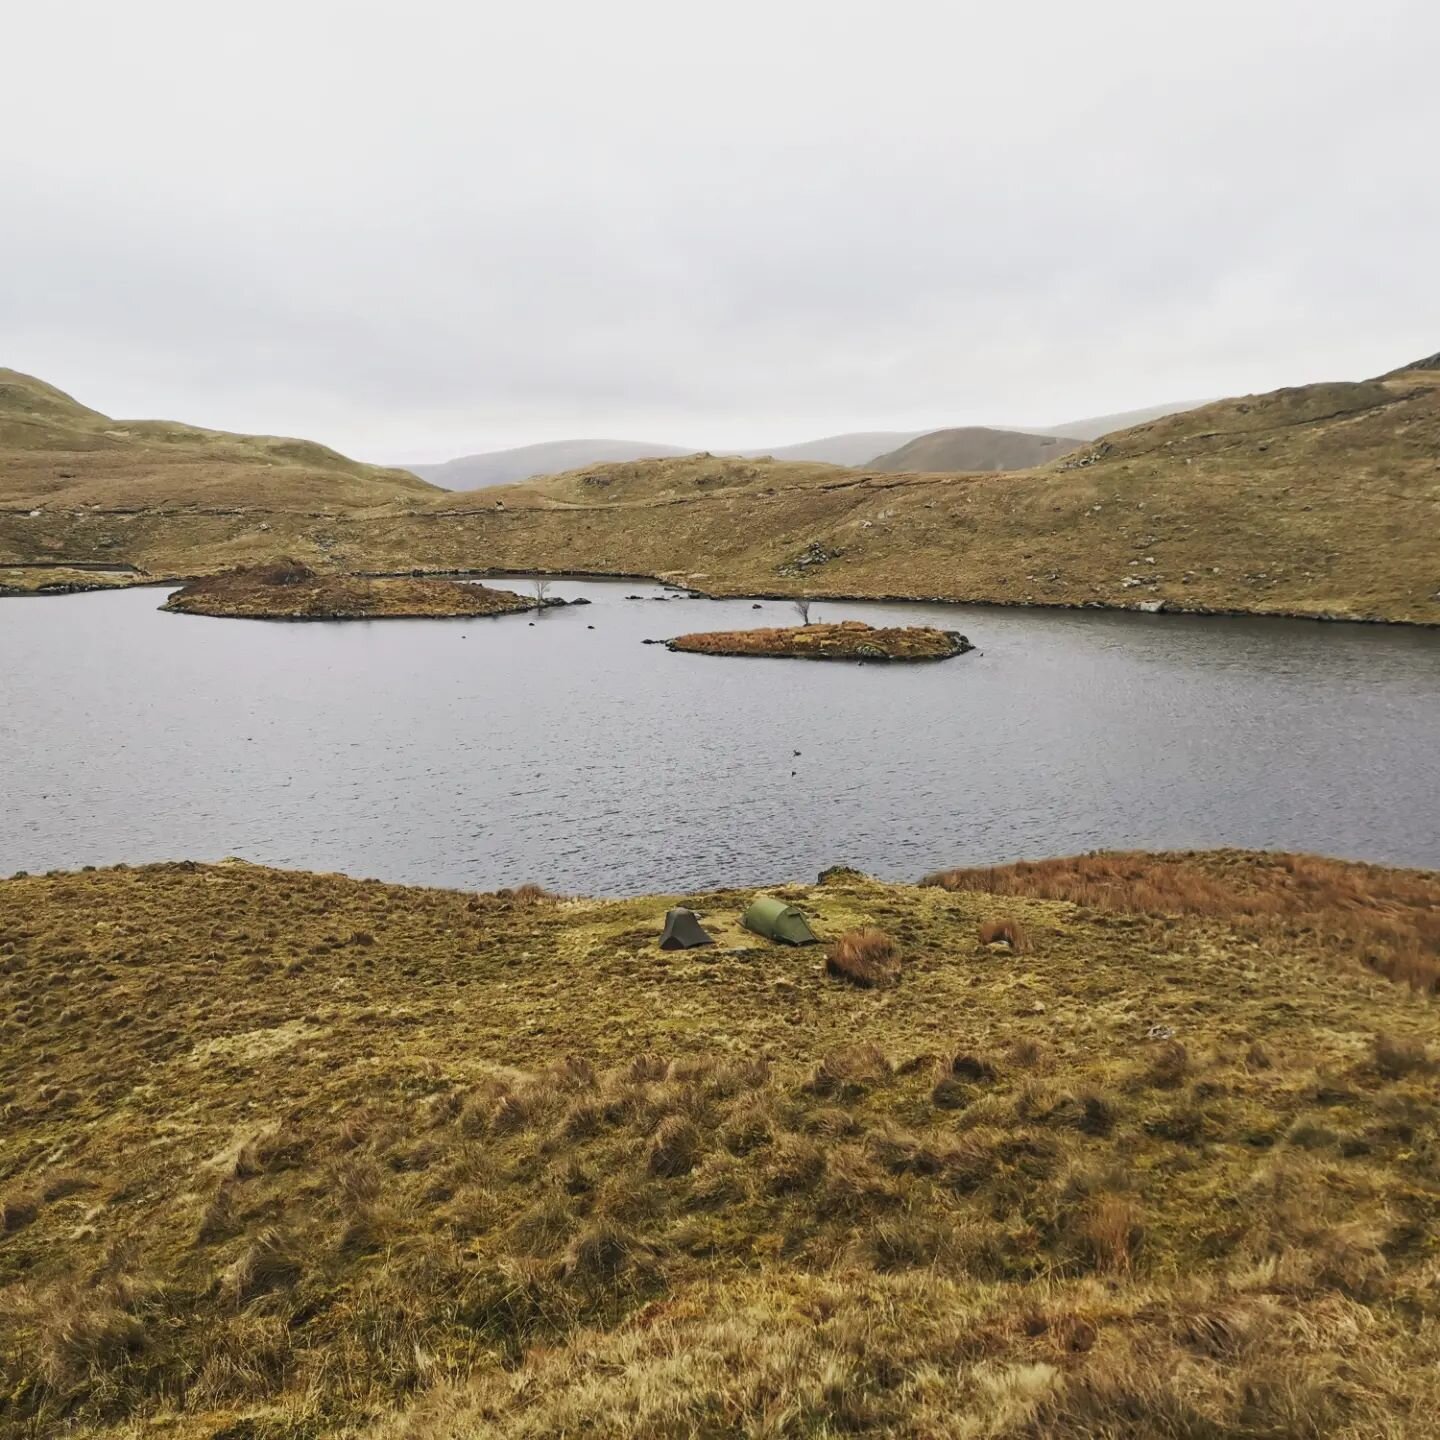 Another great pitch spot last night (tents in centre of first image. Lots of walking, not to much rain, a bit cold (let Bobby in the sleeping bag) and good company from @take.root_ @edddddeb  has left Bobby and I popped out and ready for a shower.